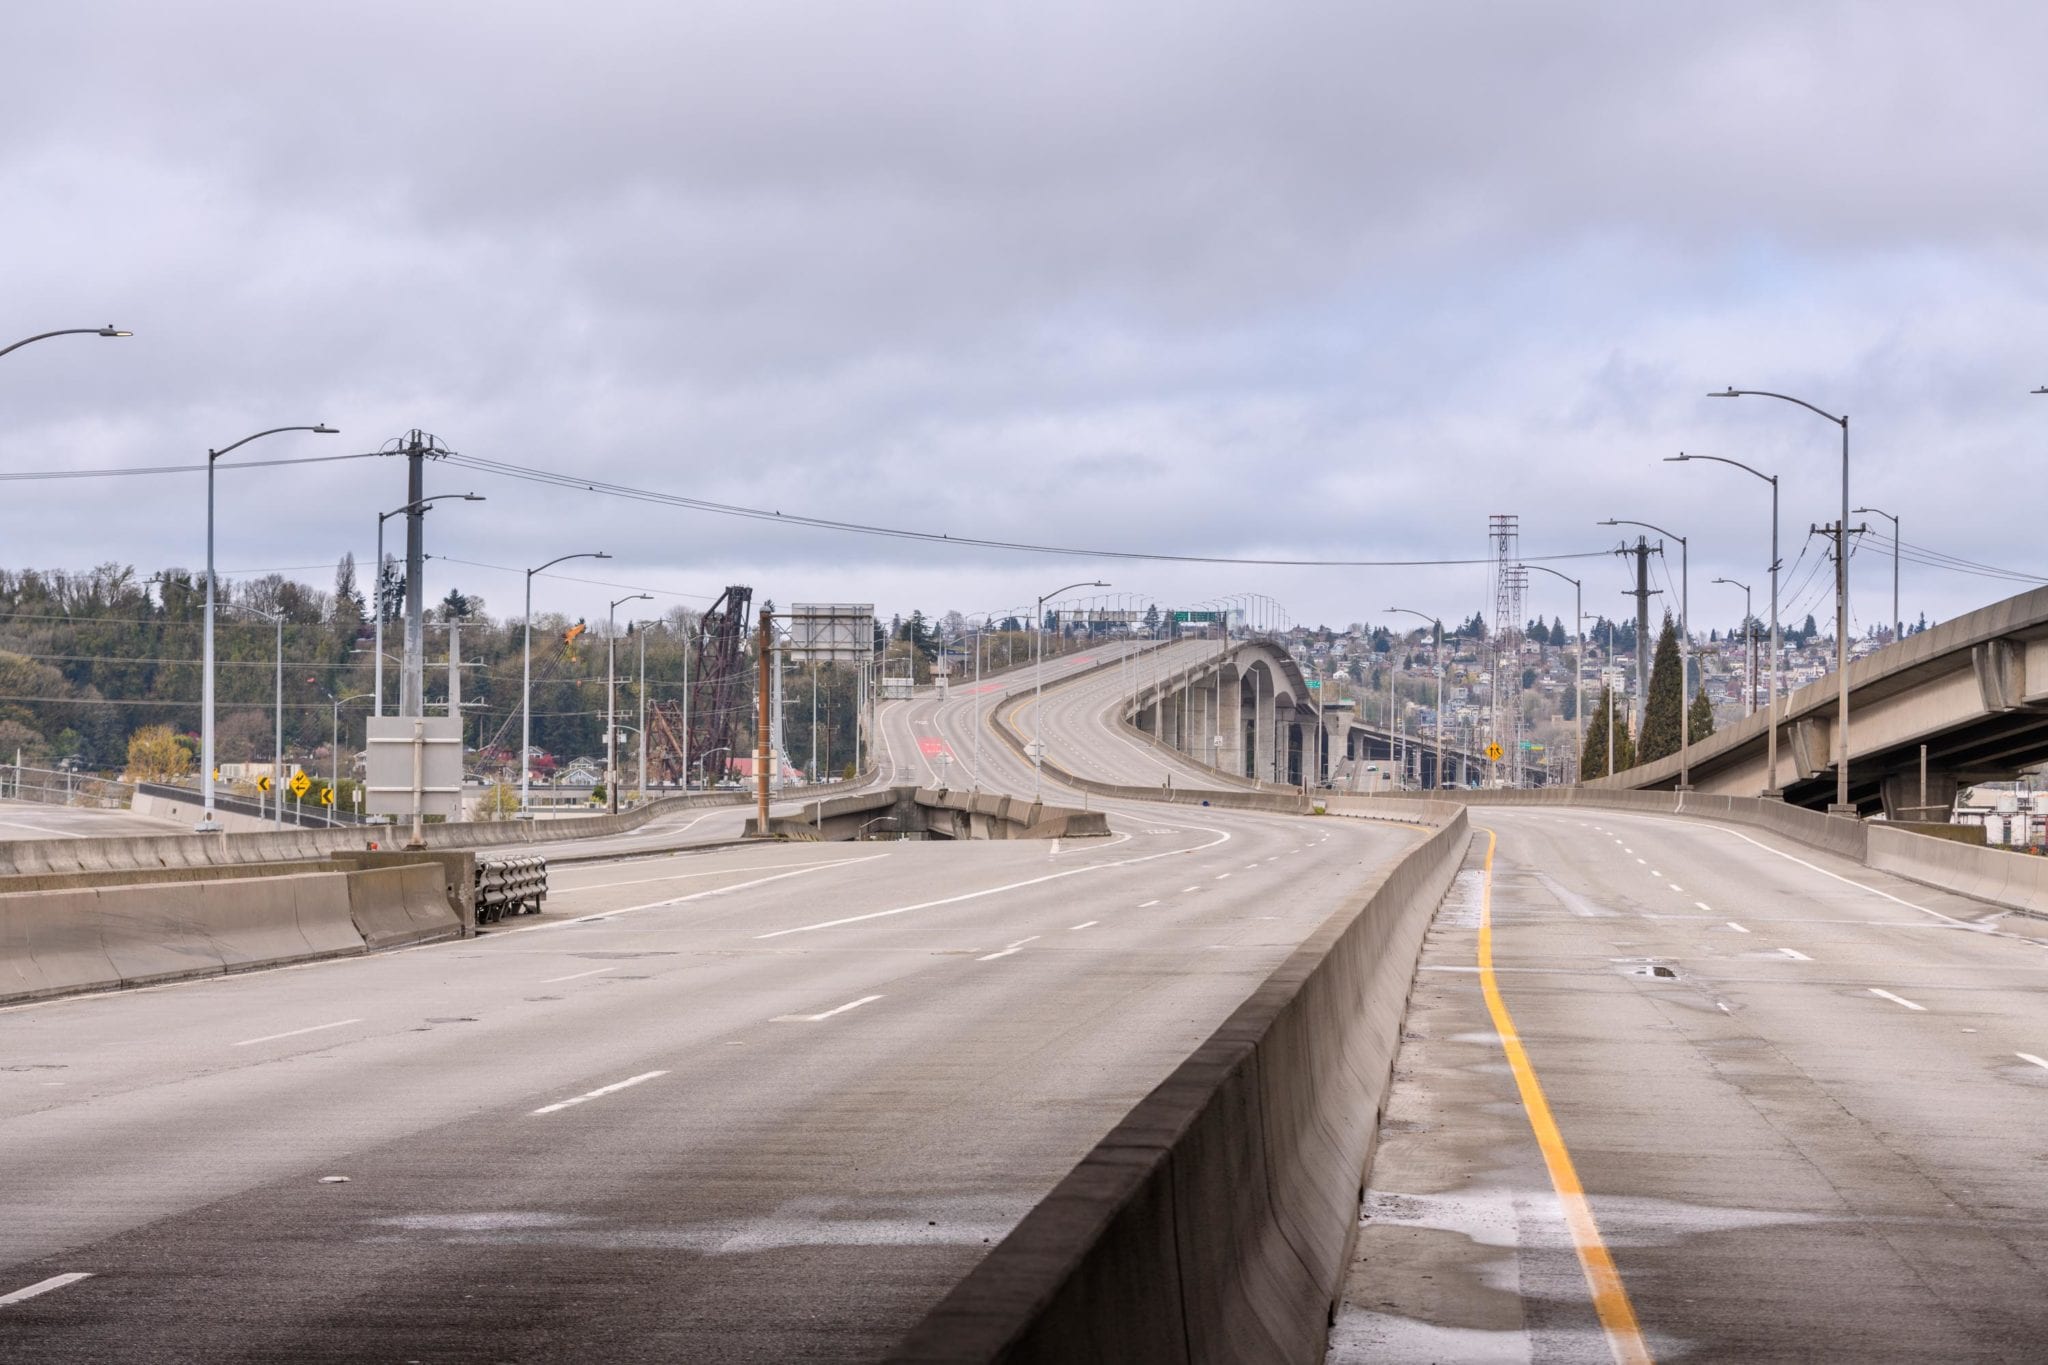 A photo of the empty and closed West Seattle Bridge.